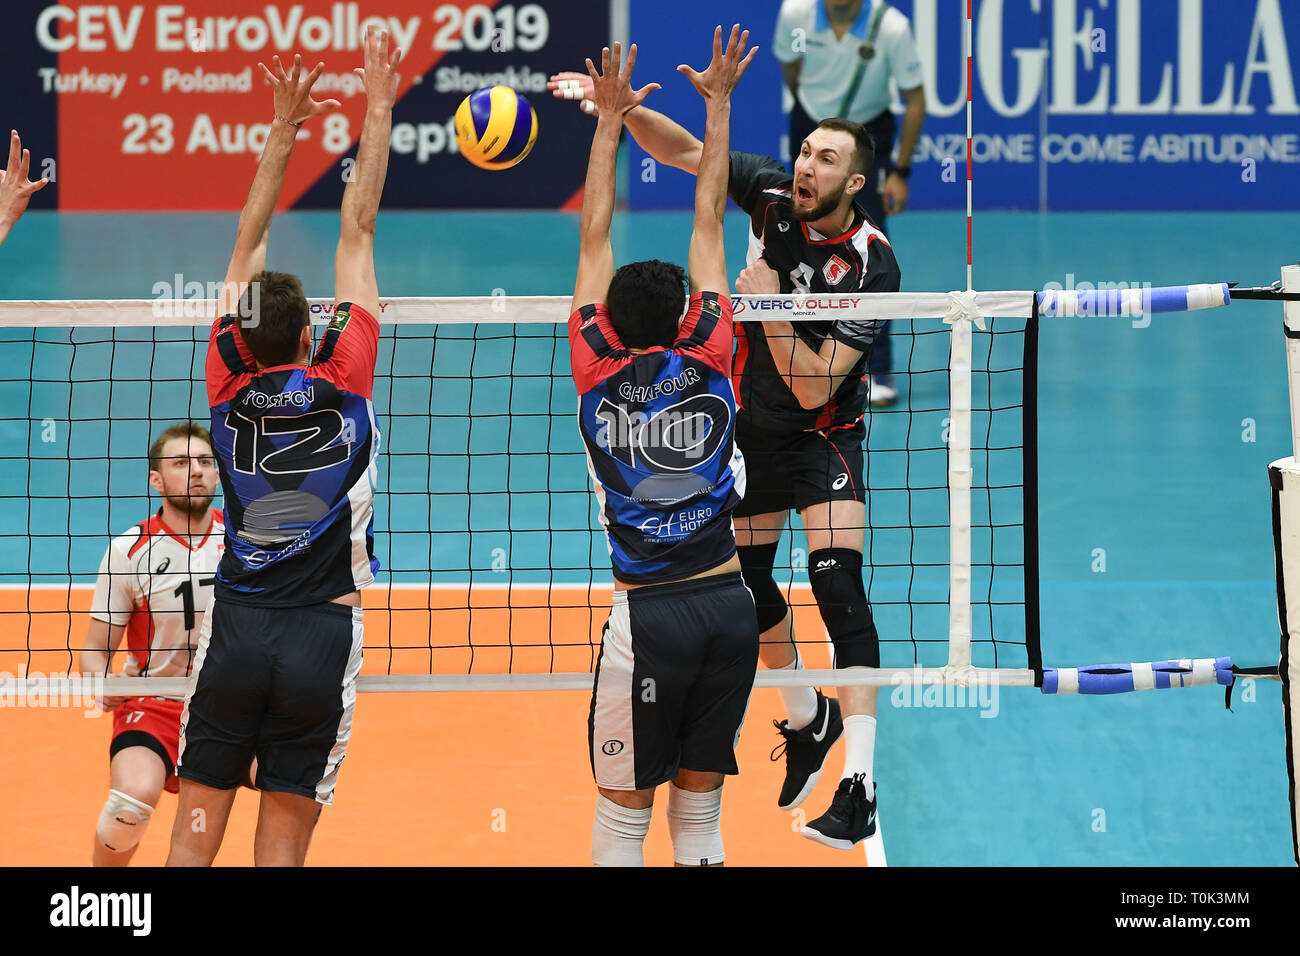 Candy Arena, Monza, Italy. 20th March, 2019. CEV Volleyball Challenge Cup men, Final, 1st leg. Nemanja Petric of Belogorie Belgorod during the match between Vero Volley Monza and Belogorie Belgorod at the Candy Arena Italy.  Credit: Claudio Grassi/Alamy Live News Stock Photo